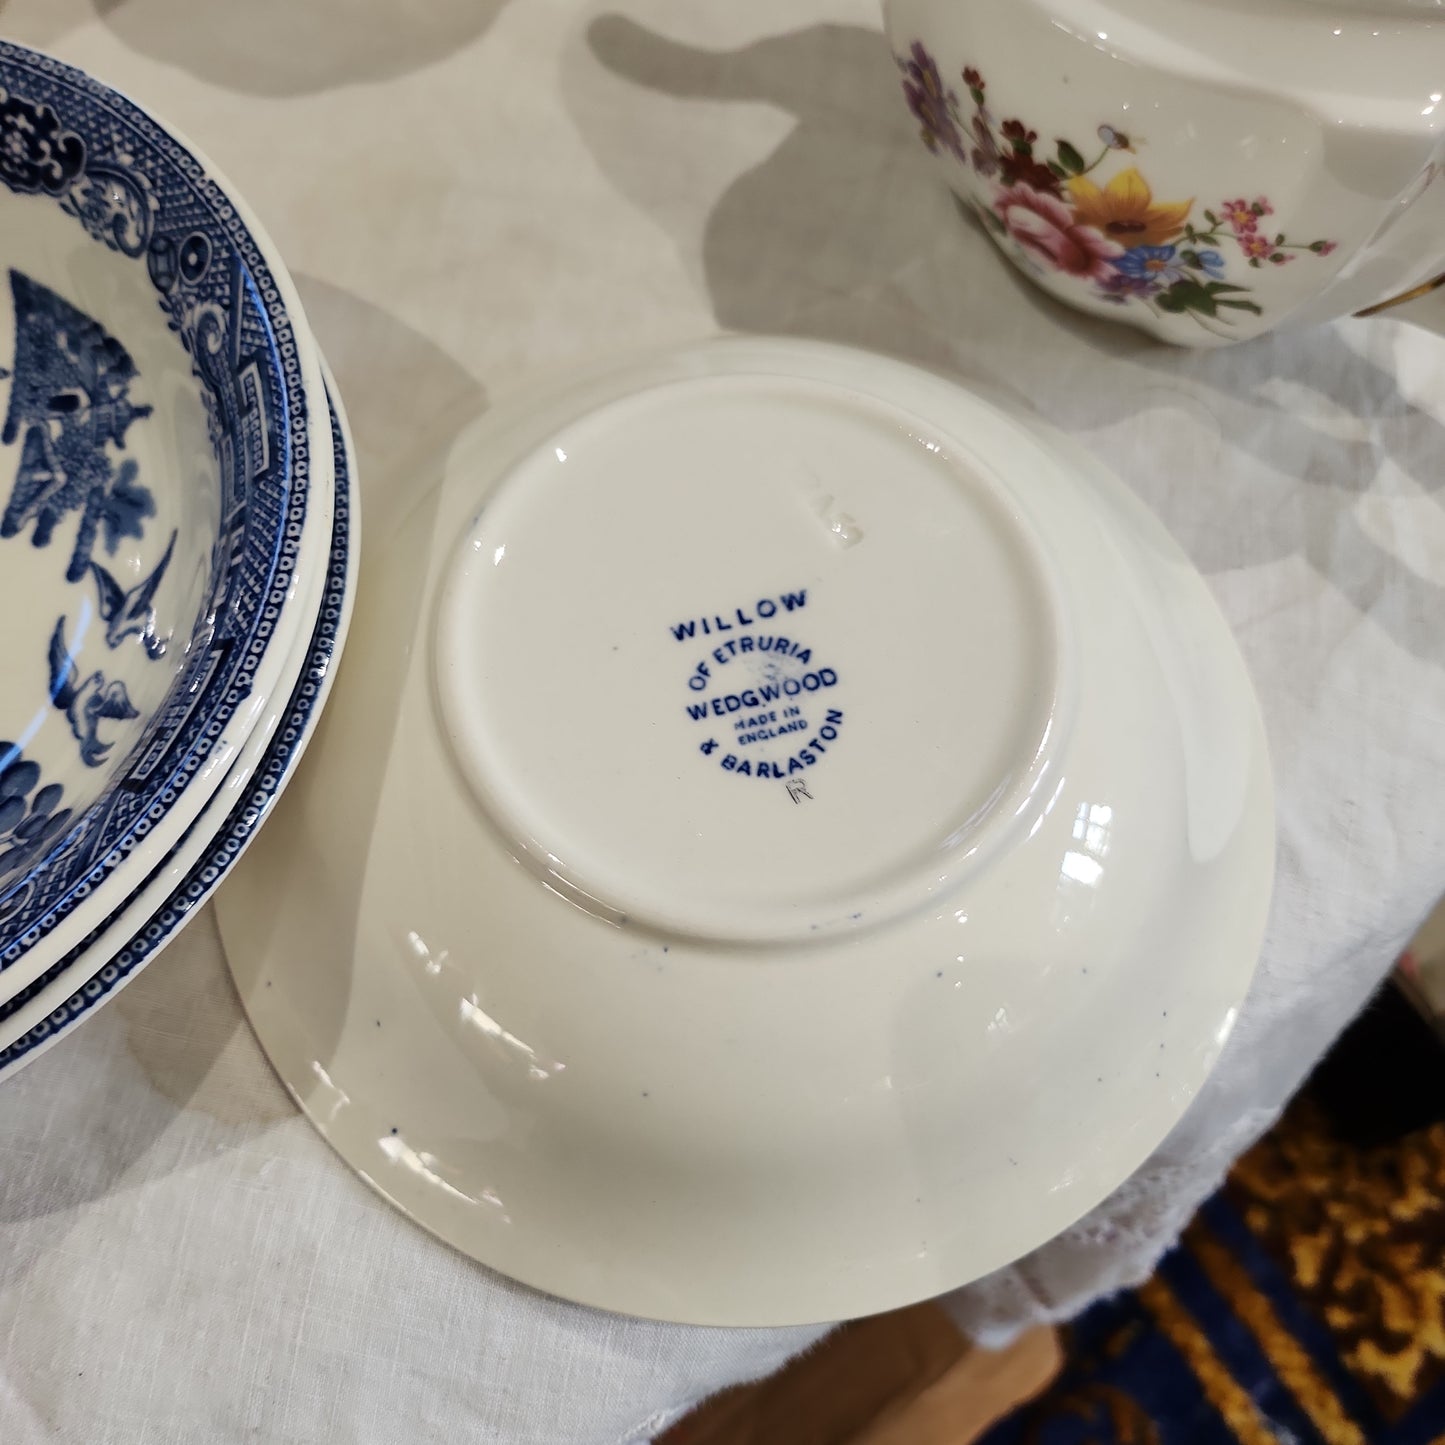 Early century Wedgwood Blue willpw soup bowl